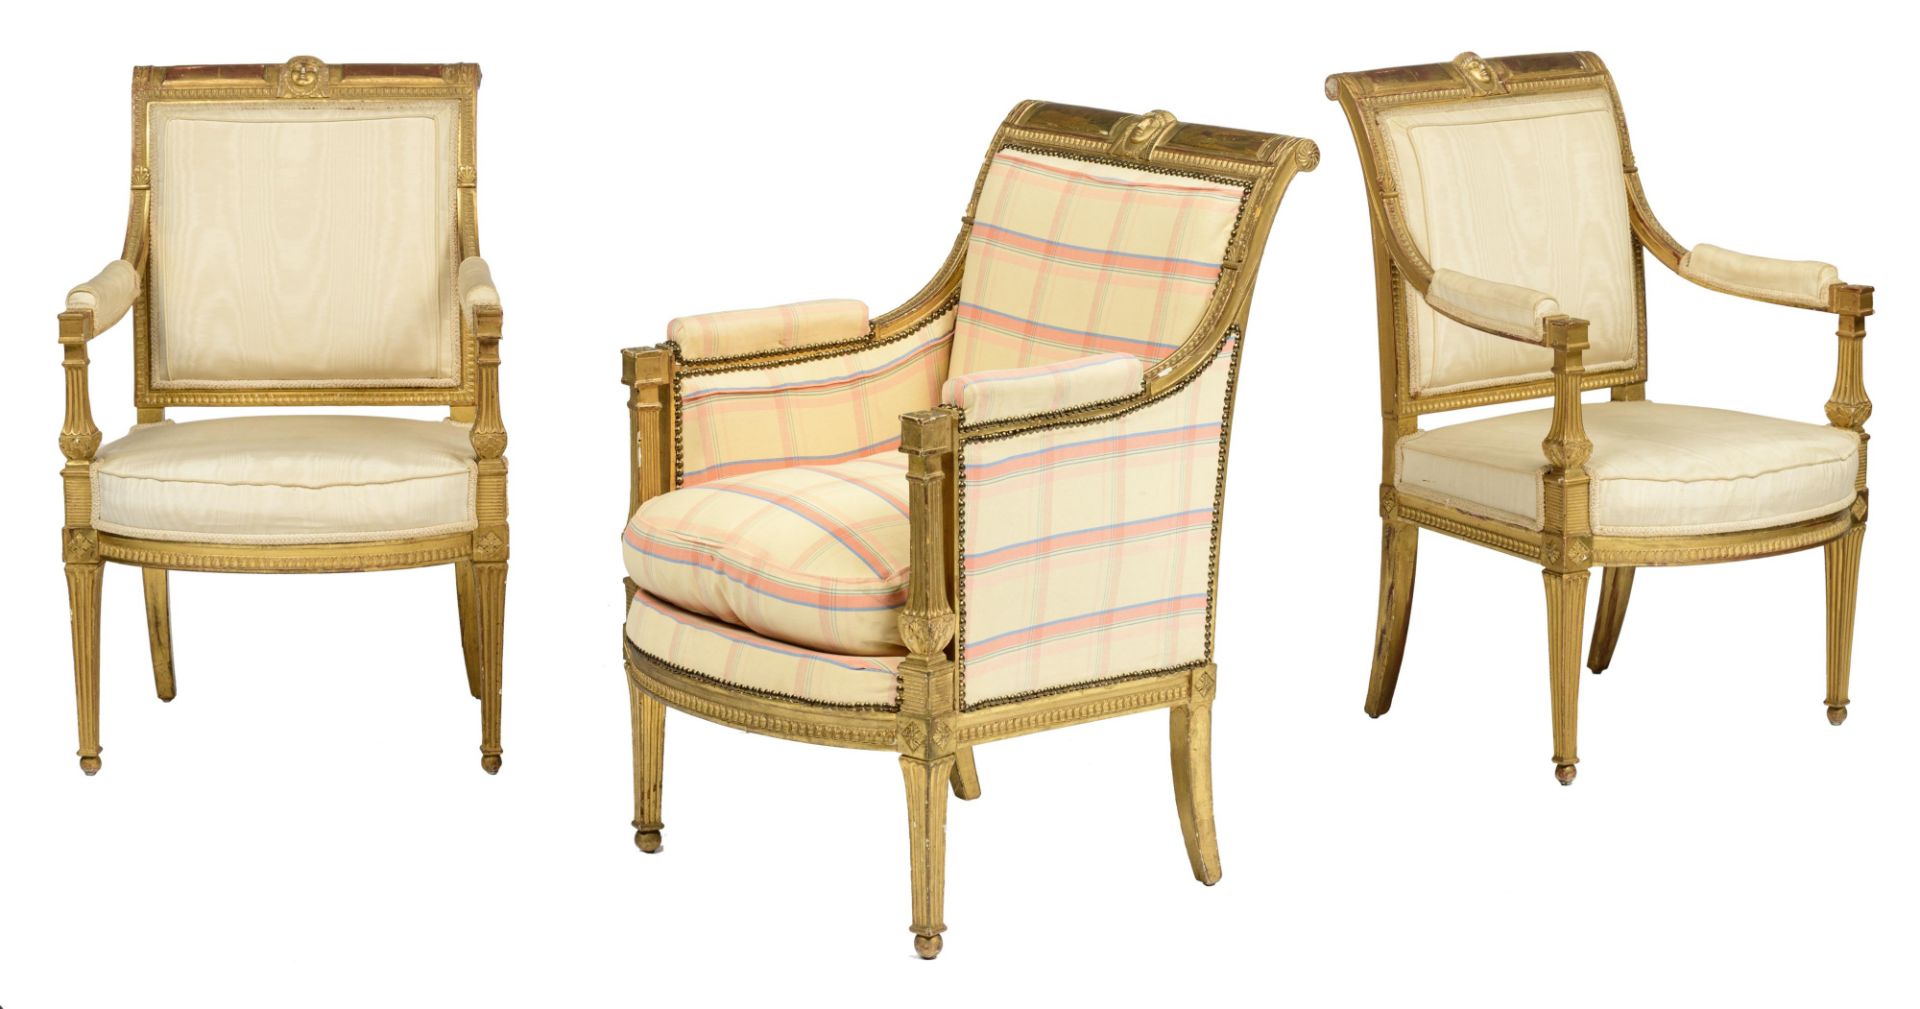 A gilt wooden French Directoire set of two armchairs and one 'bergŠre', 1795 - 1799, H 93 - W 58 - 6